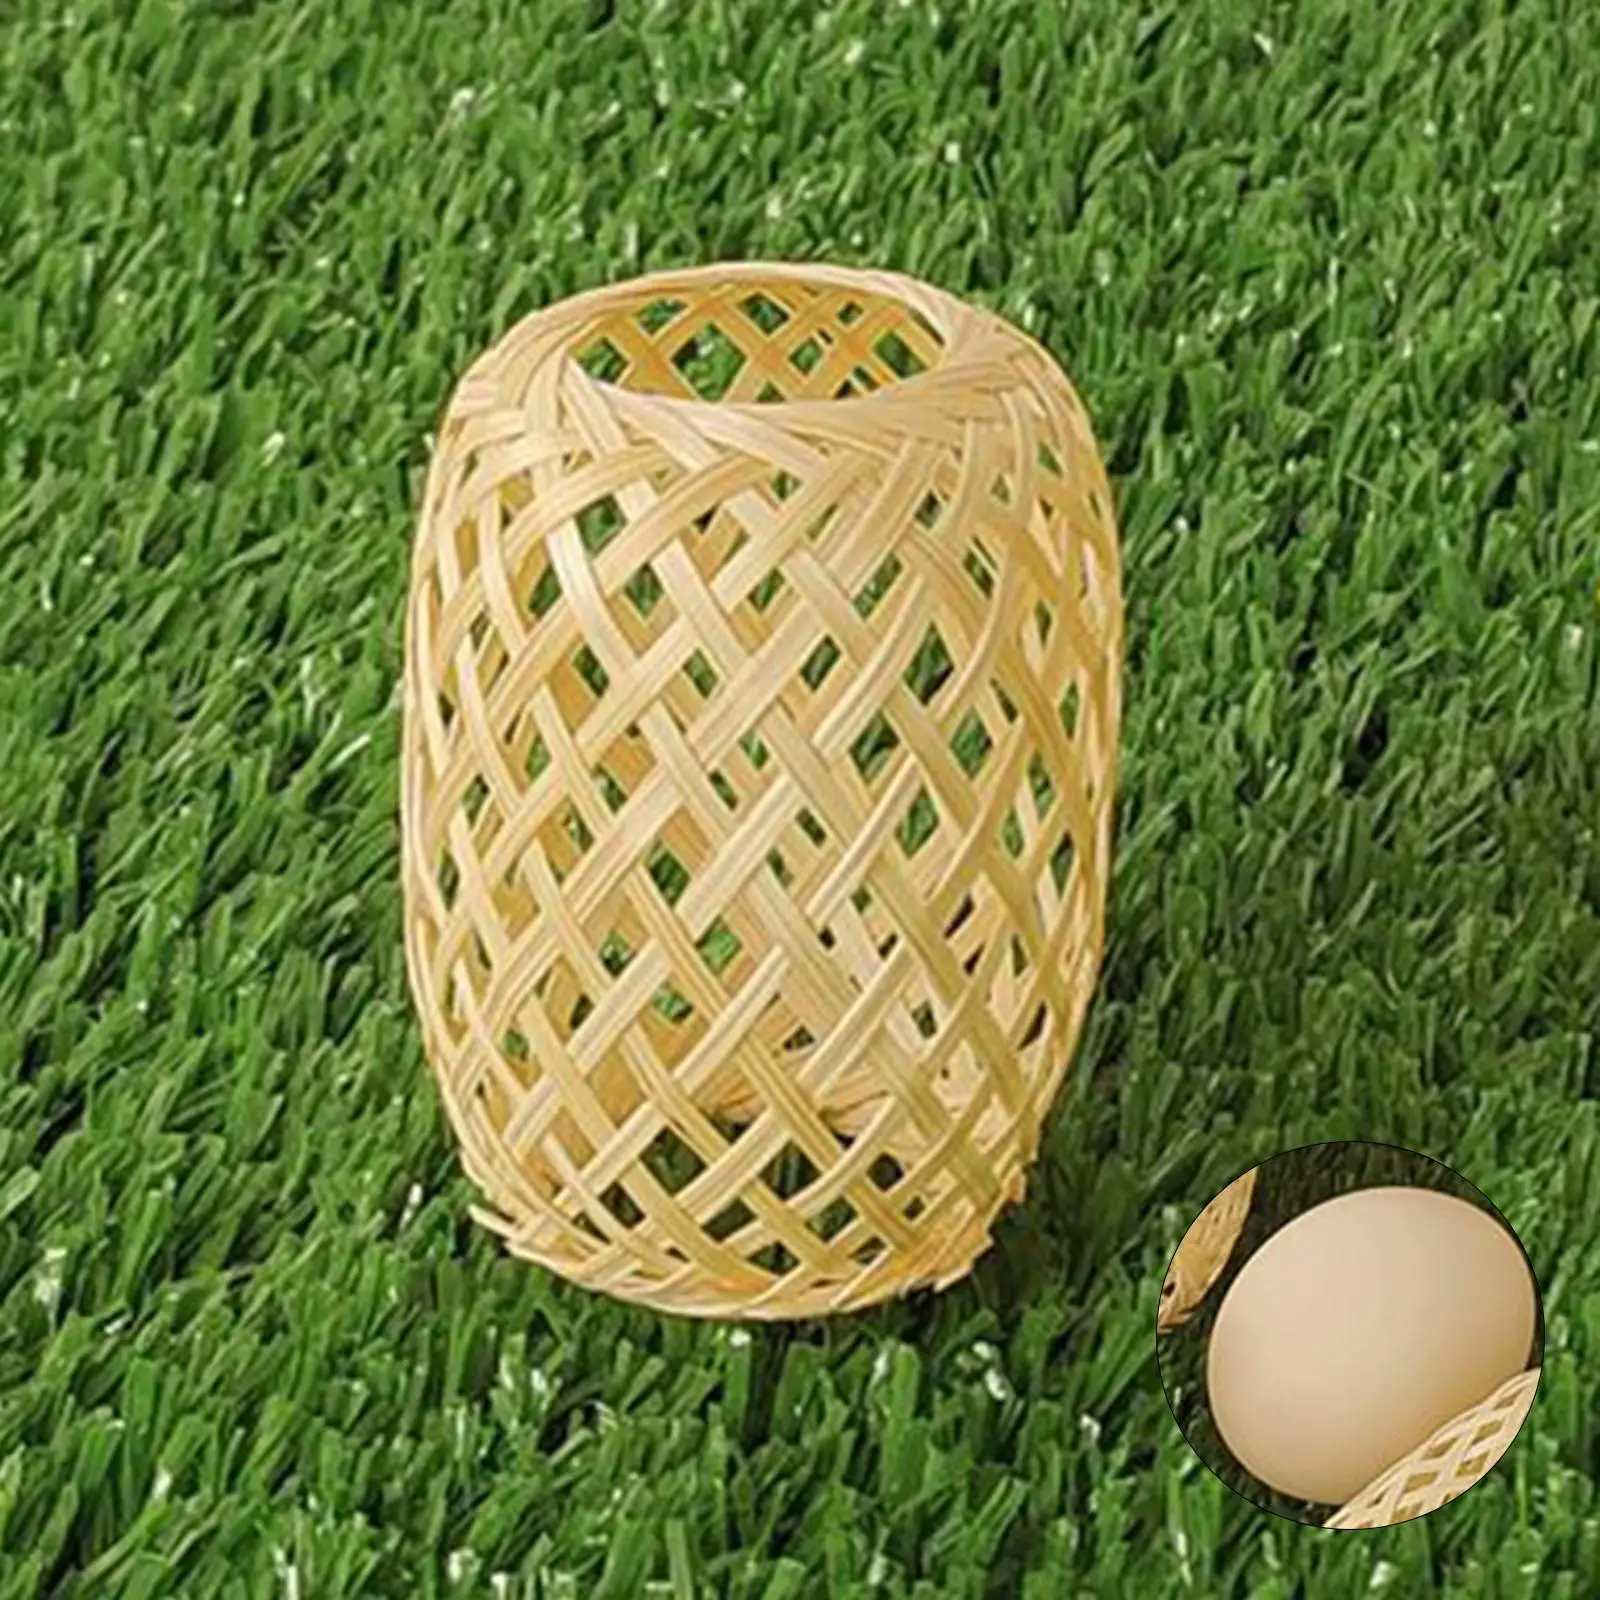 Classic Lantern Decor Pendant Light Cover DIY Supply Bamboo Woven Lampshade for Automative Bedroom Kitchen Dining Room Office